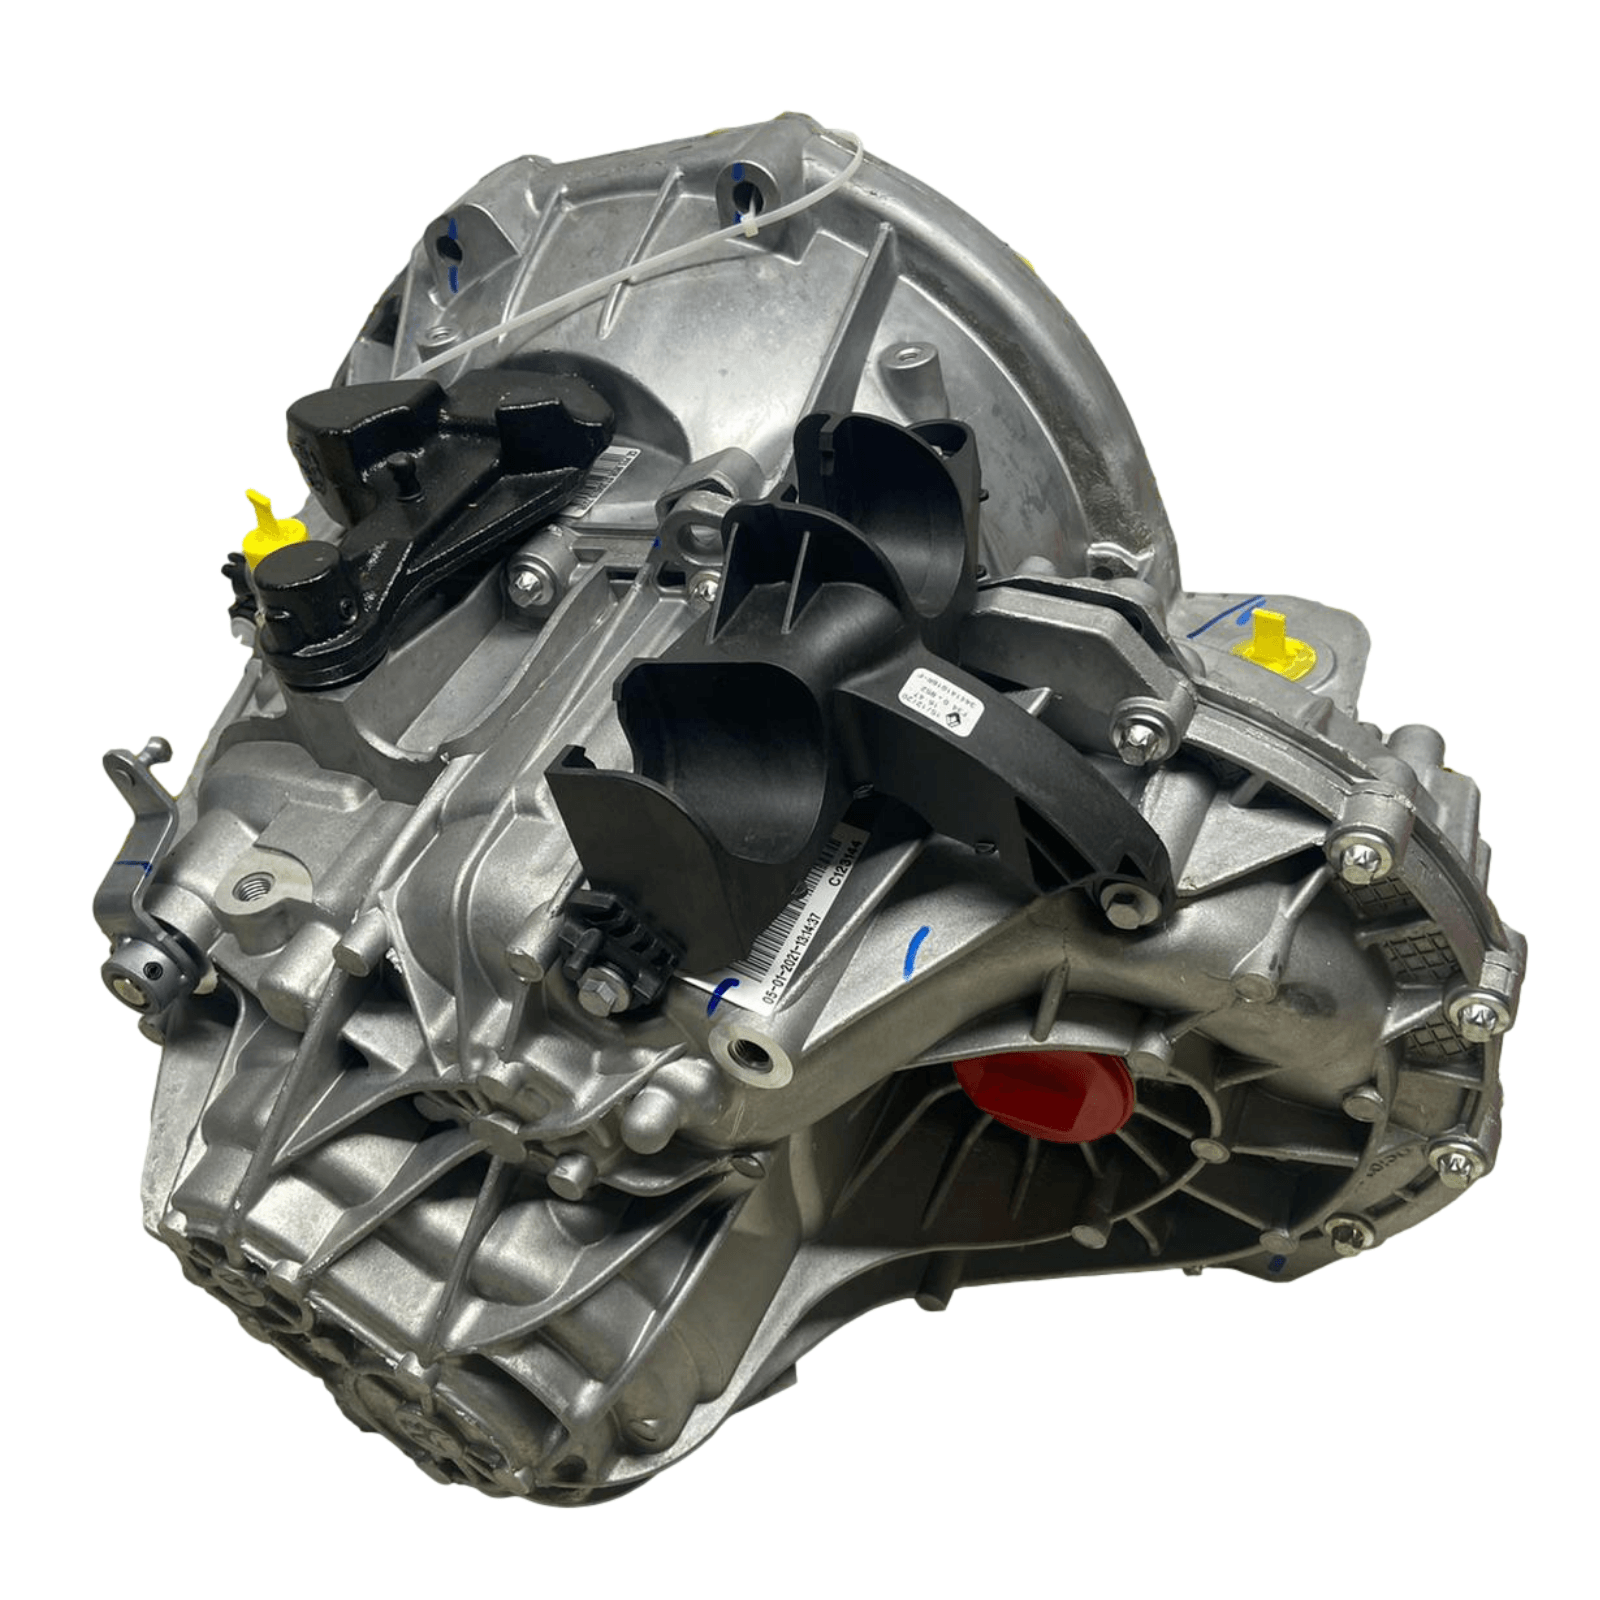 bloeden Ingang Vader fage Reconditioned Vauxhall Vivaro PF6 Gearbox Transmissions – vehiclewise